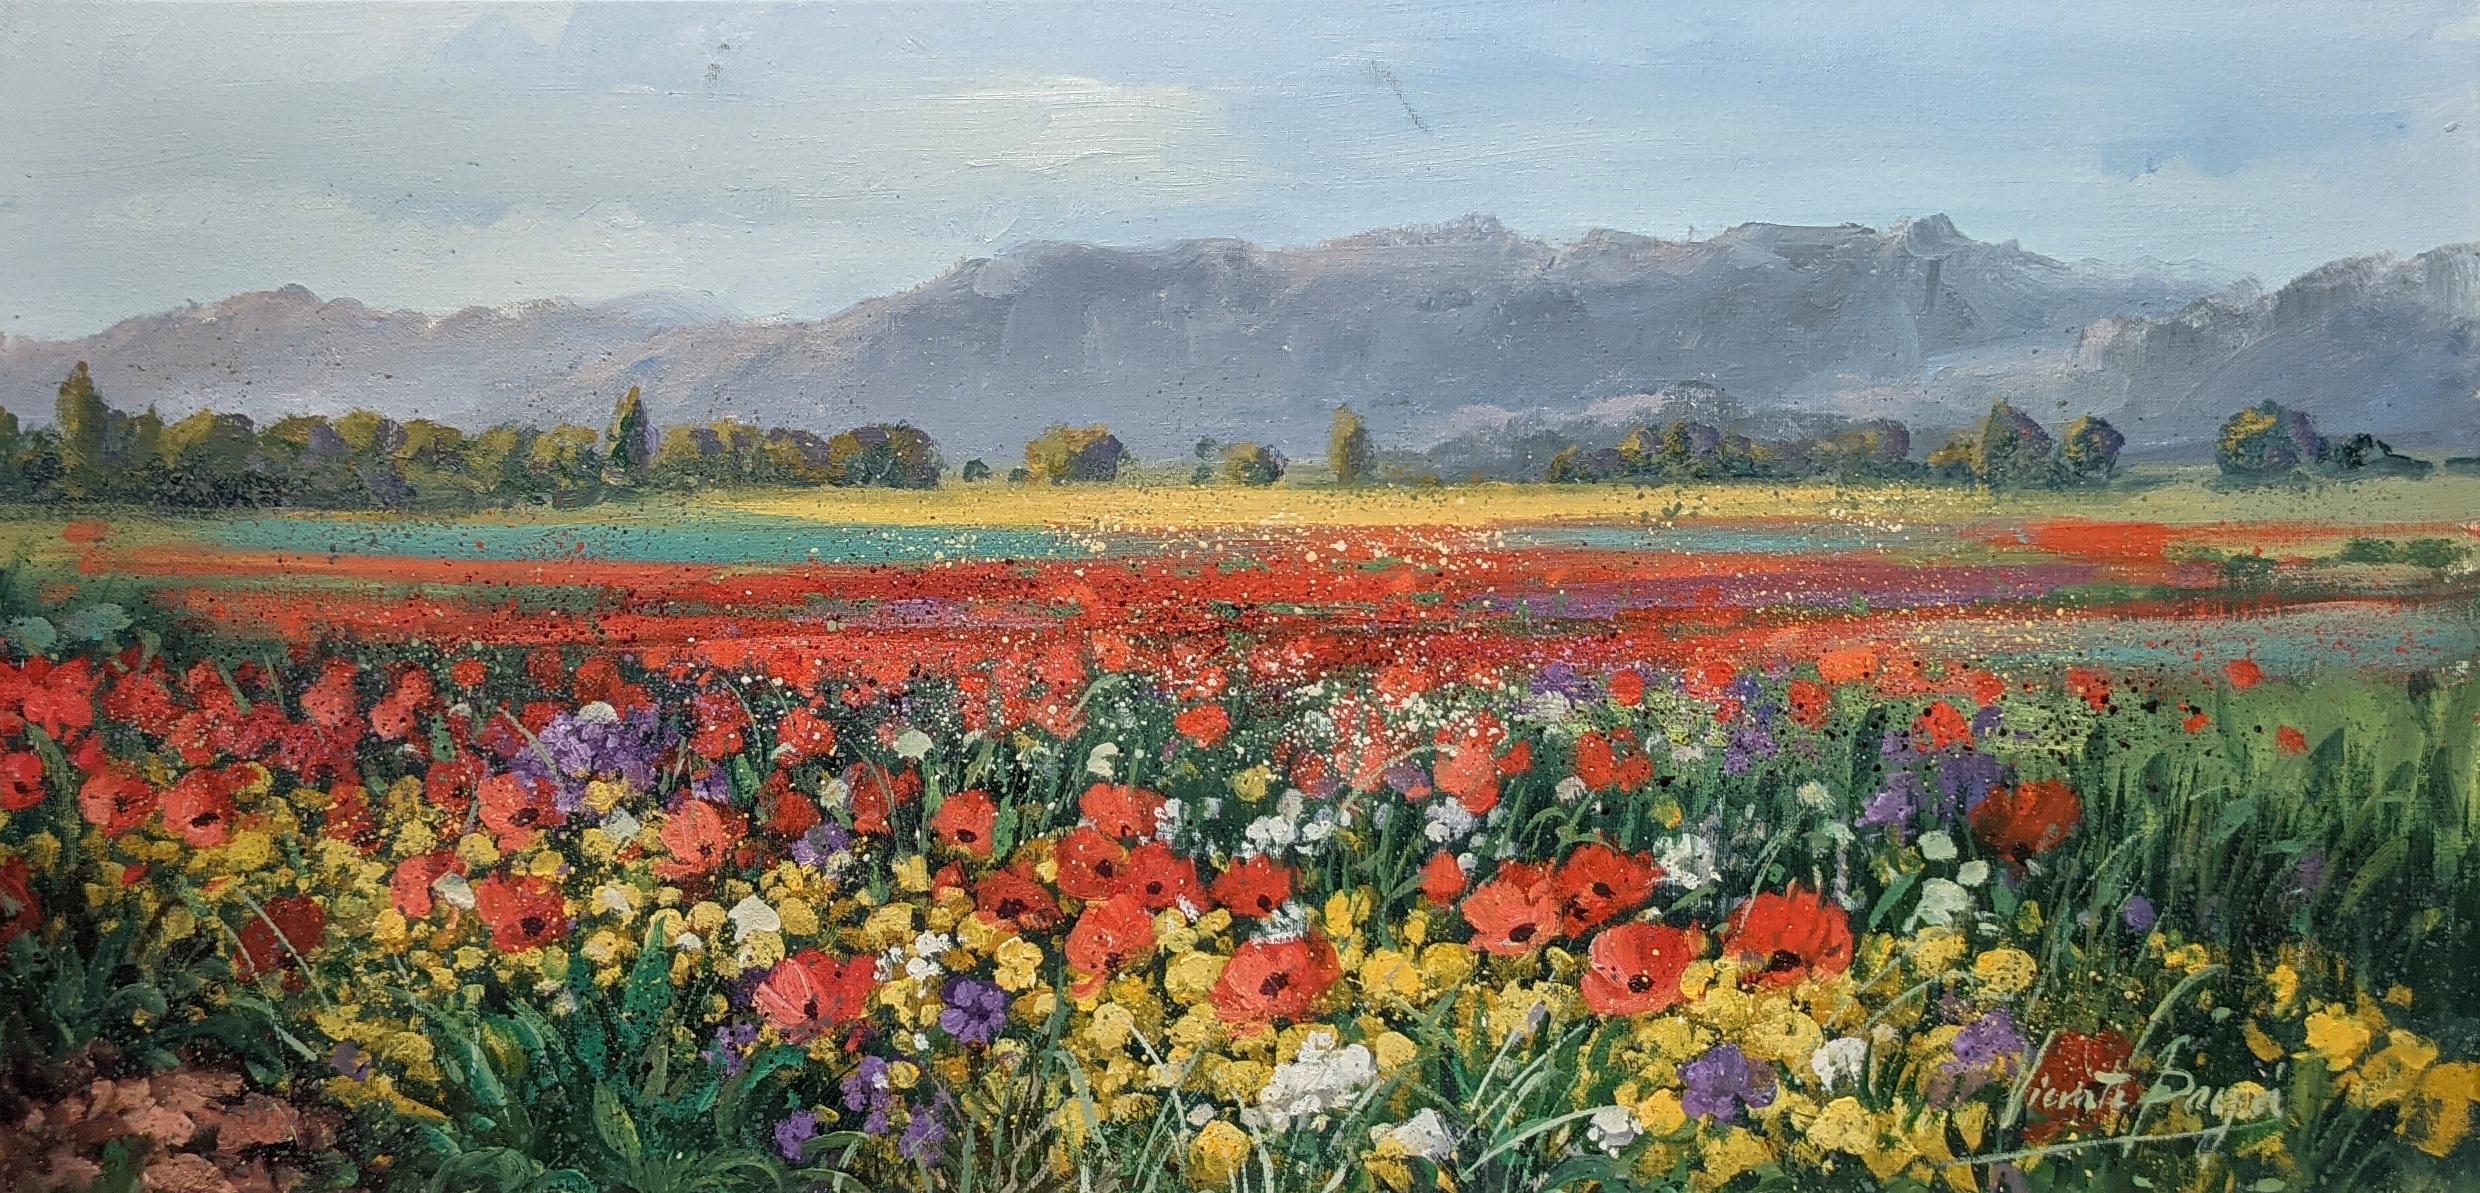 'Poppy Fields' Colourful contemporary landscape painting of flowers in a field  - Painting by Vincent Paya